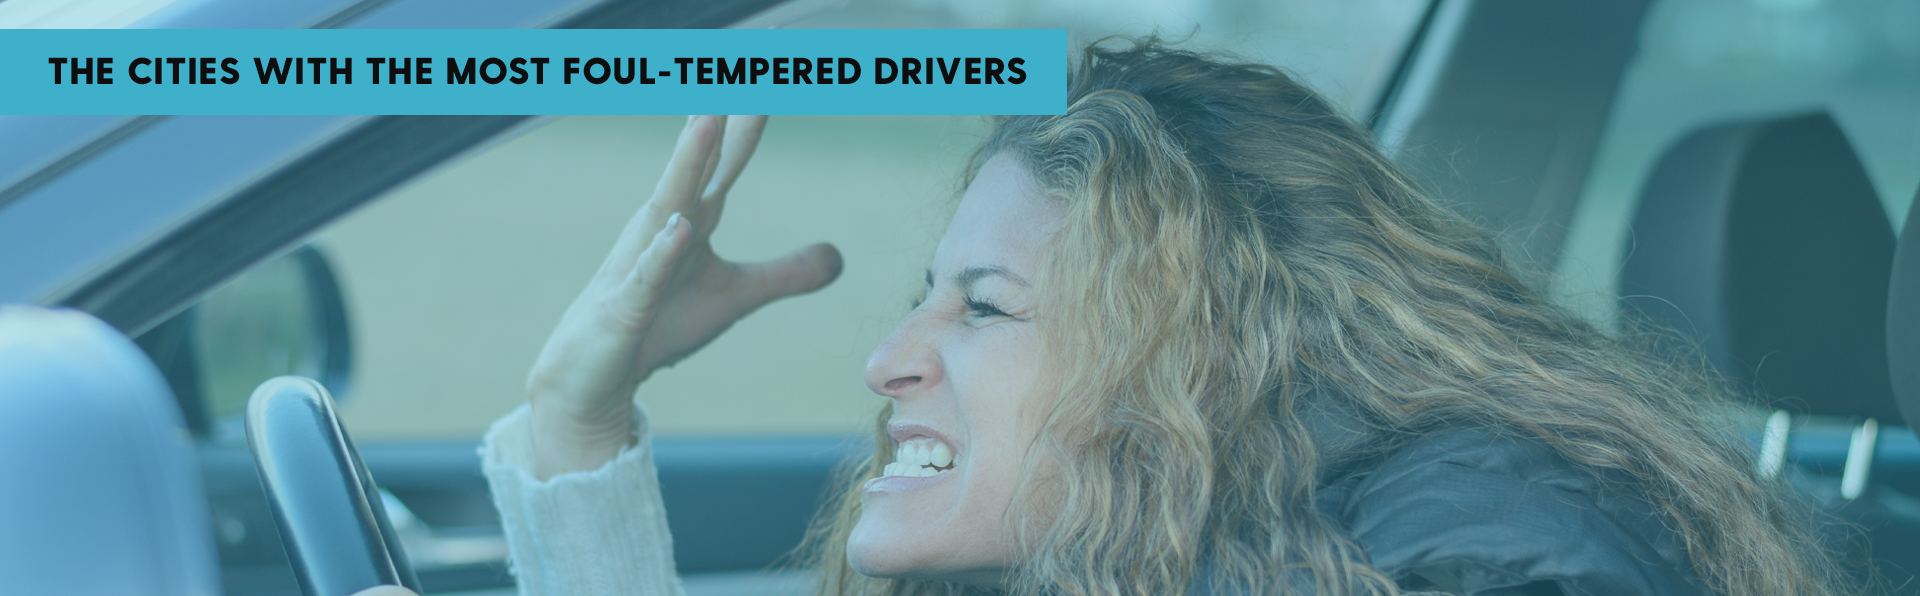 The Cities With The Most Foul-Tempered Drivers